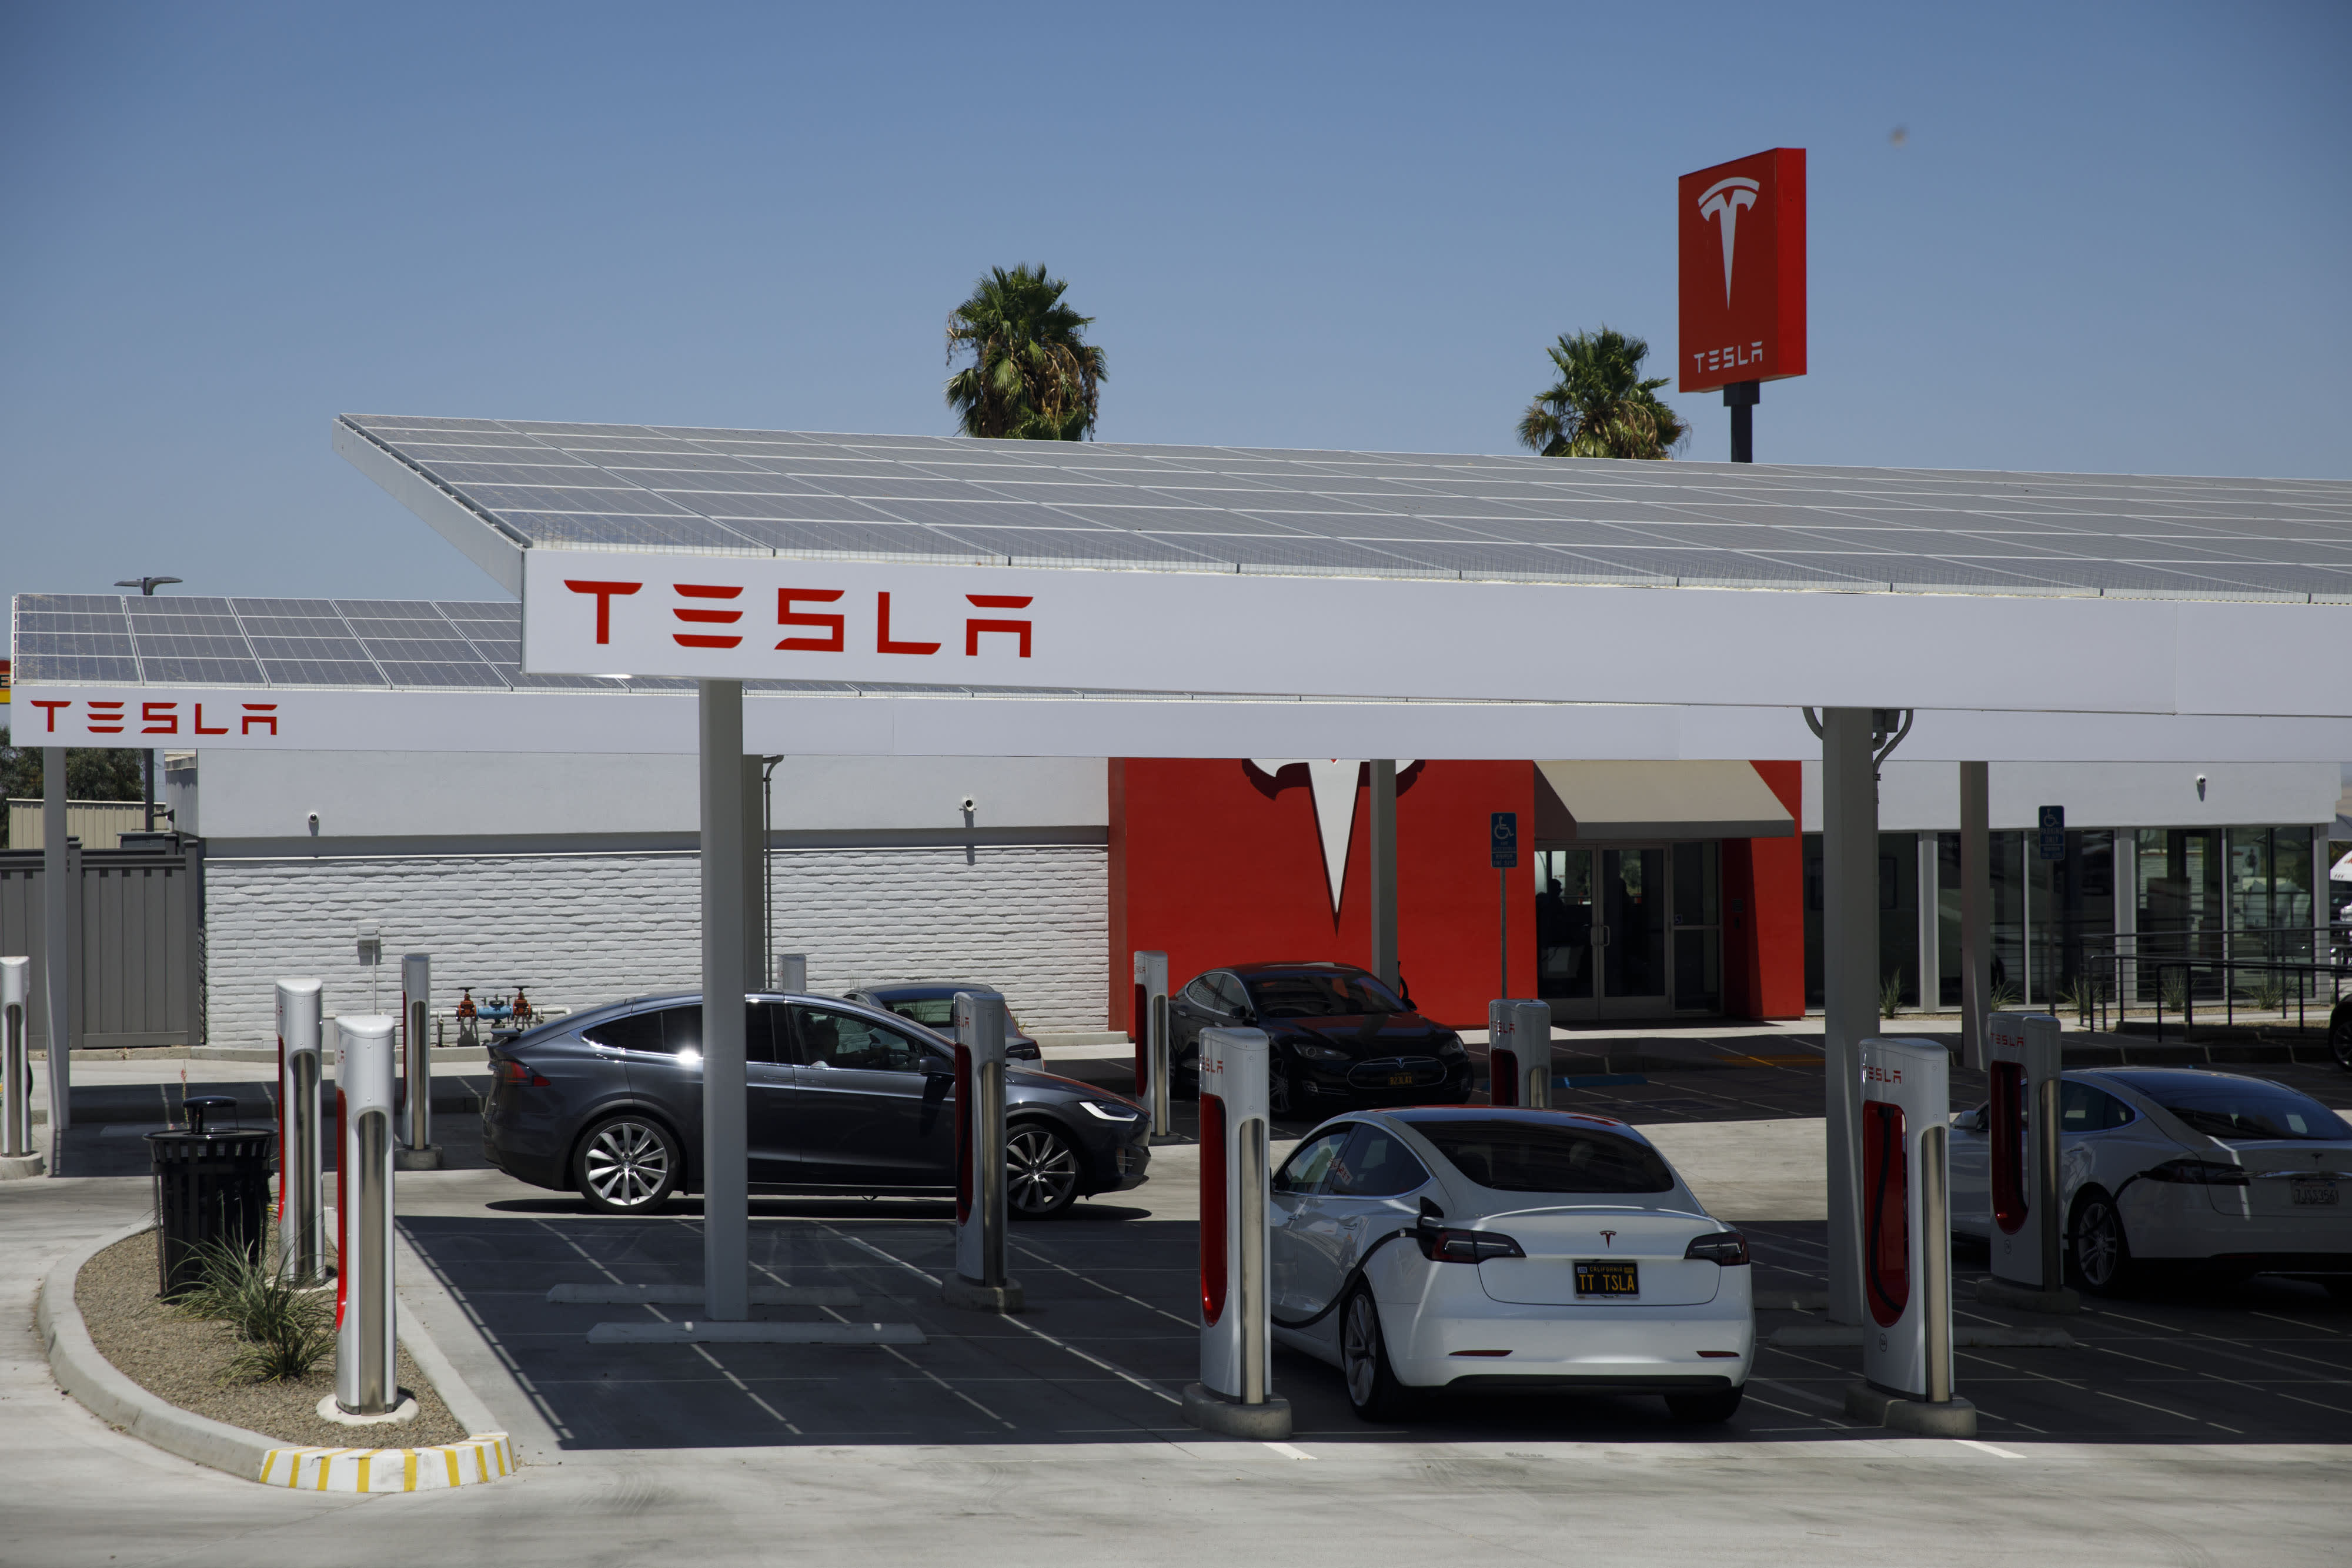 Elon Musk predicts success for Tesla solar and energy storage